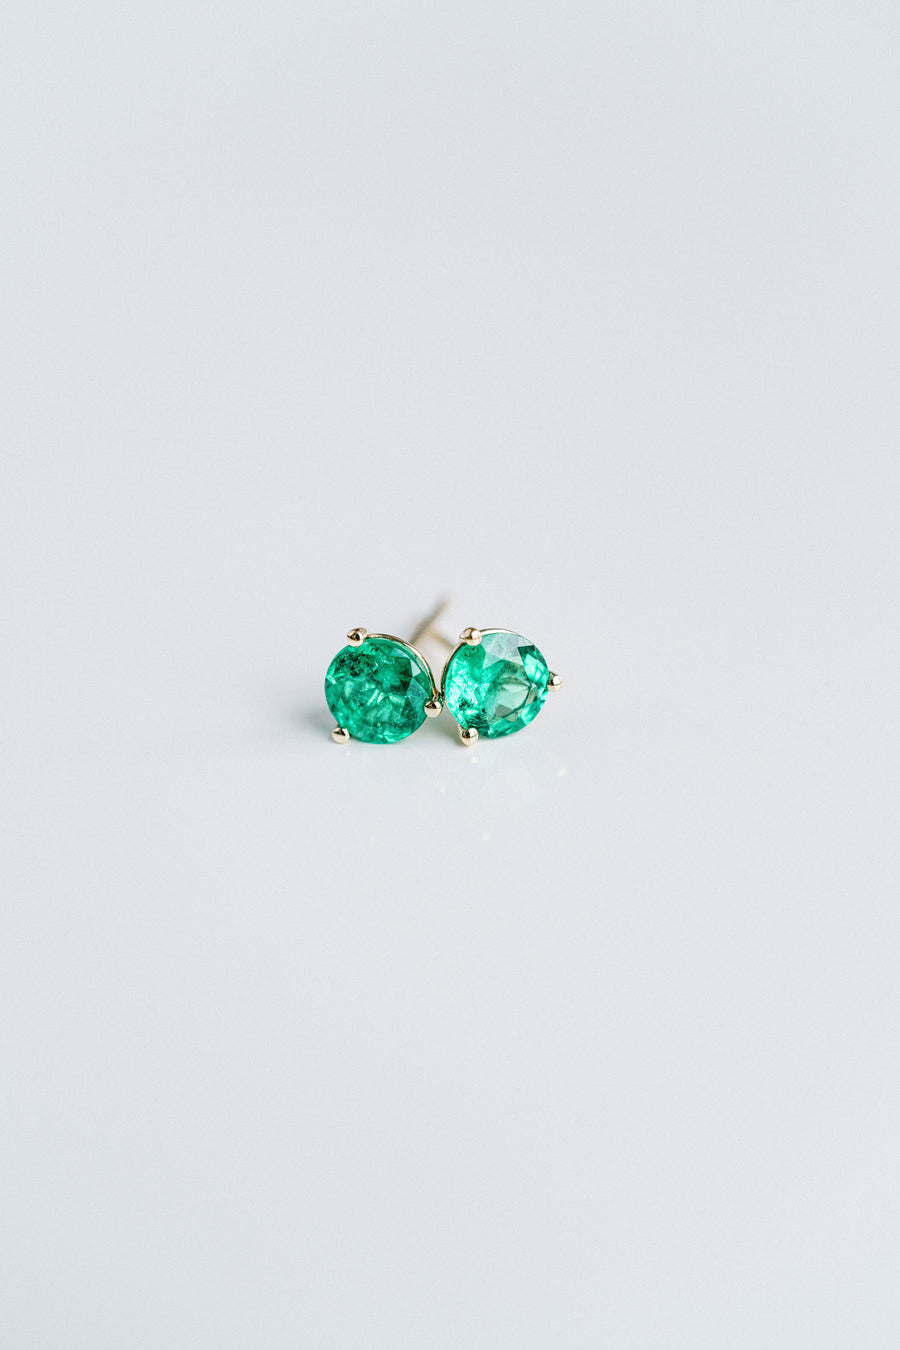 0.90ctw. Round Colombian Emerald Studs, 14k Yellow Gold